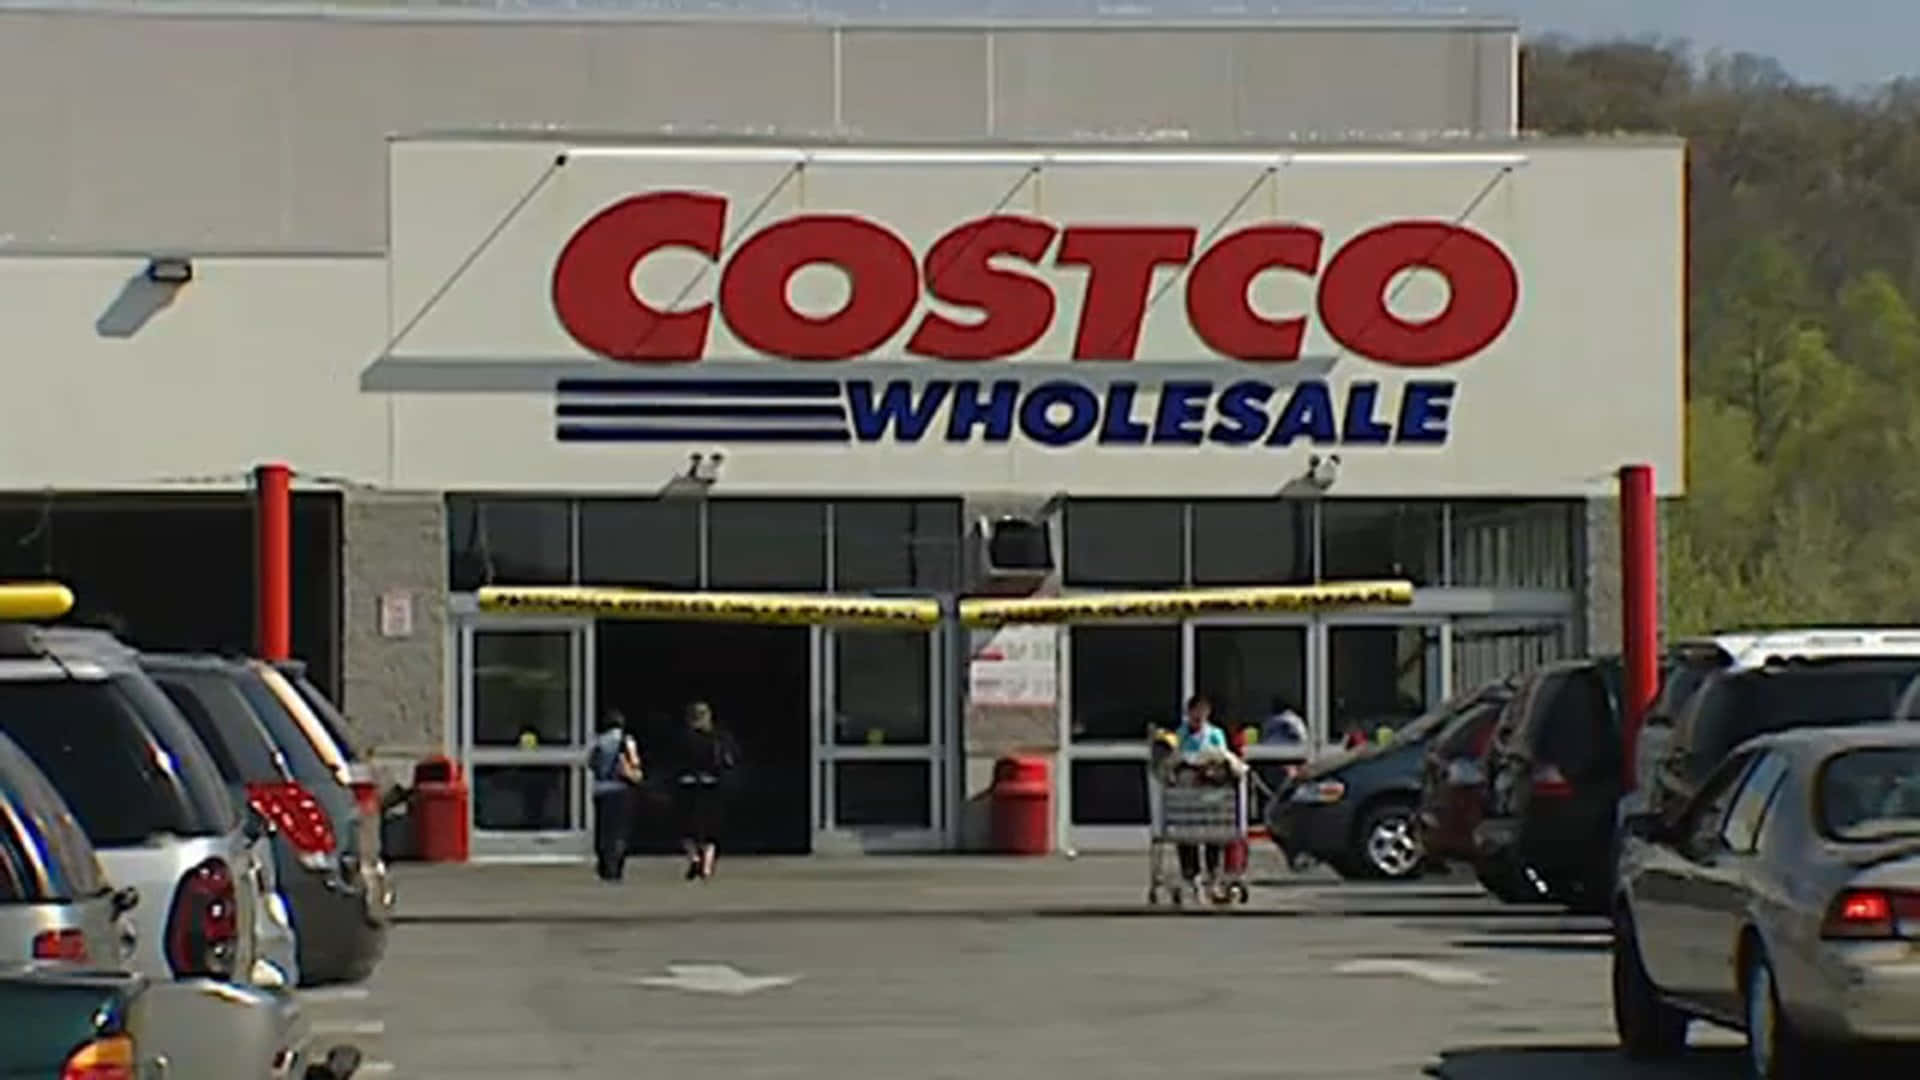 Costco Wholesale Is A Large Store With Cars Parked Outside